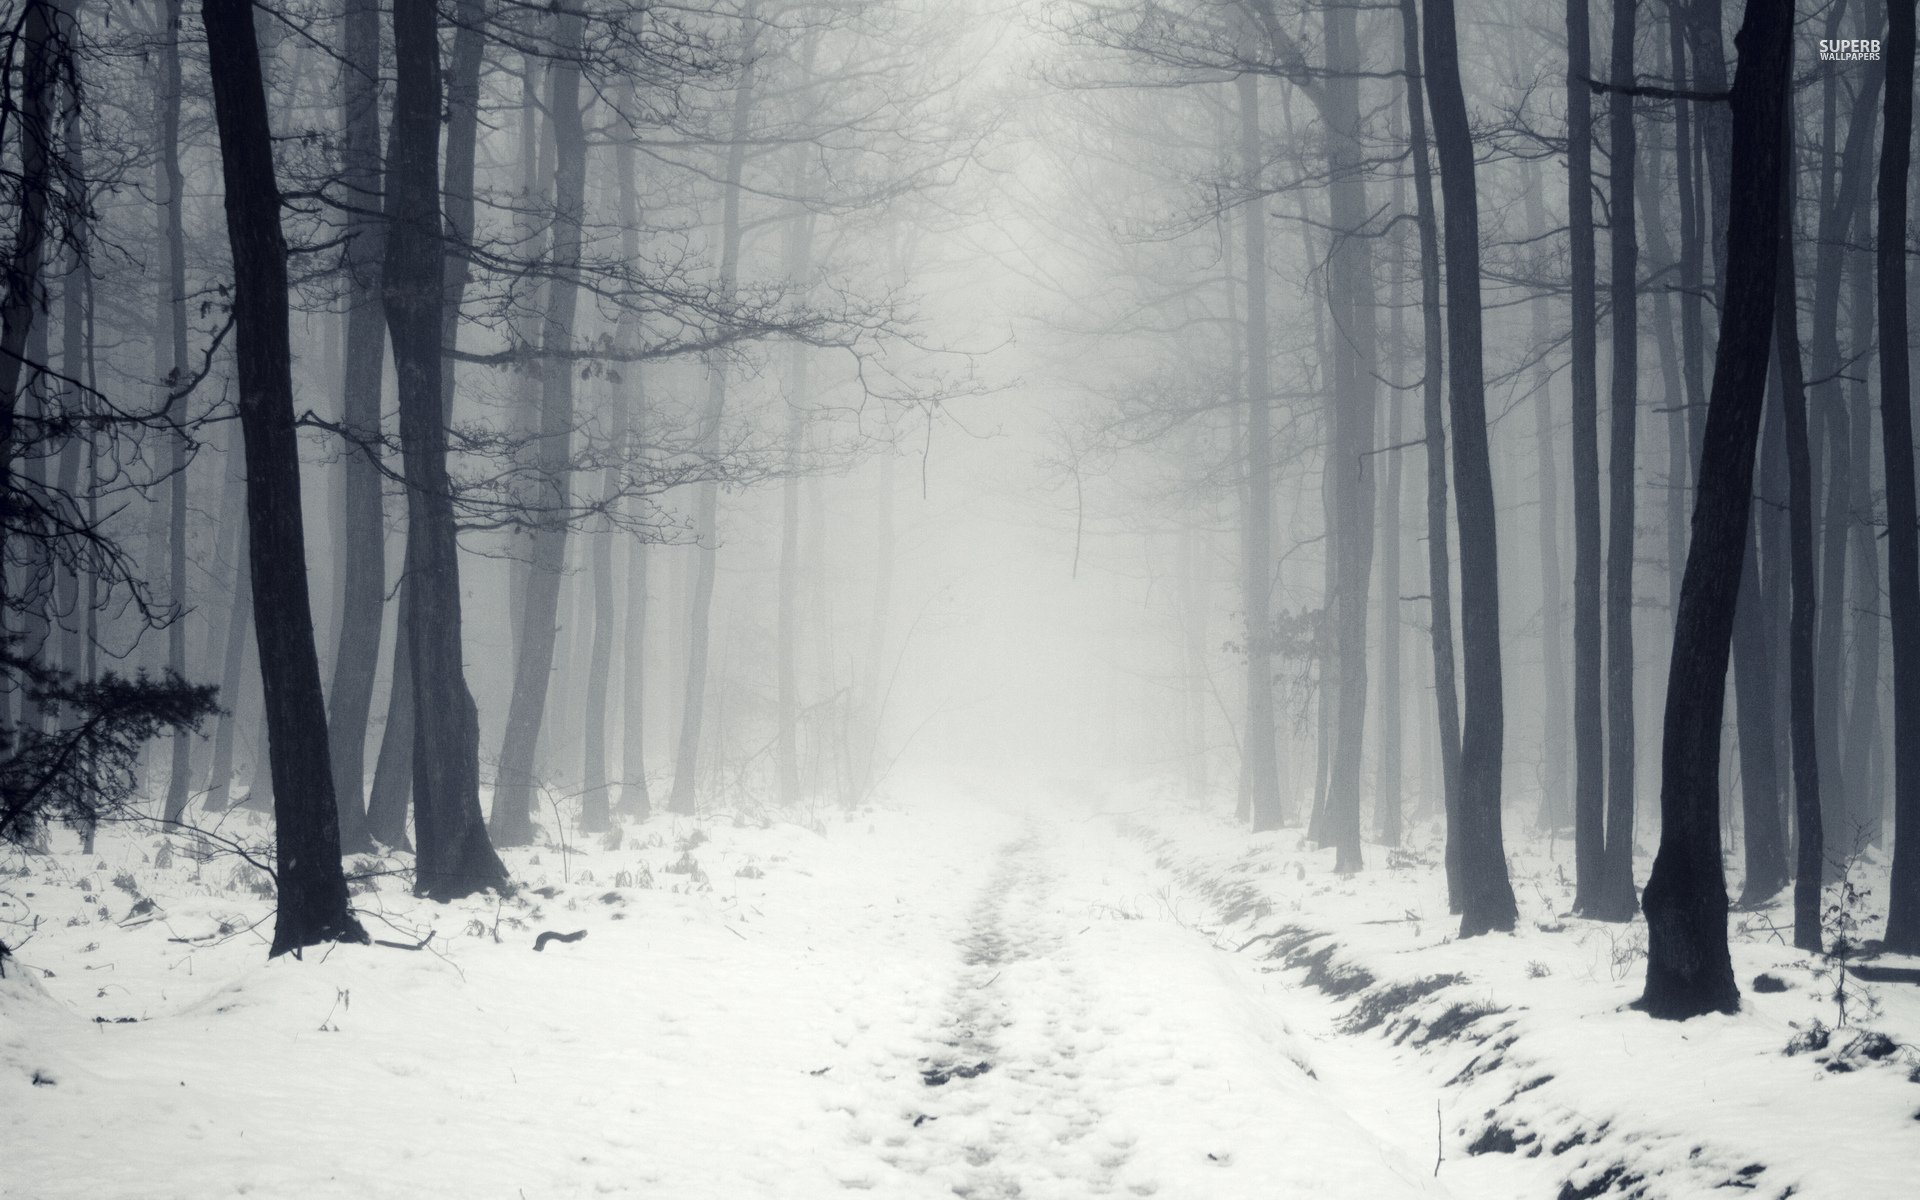 Snowy Path In The Foggy Forest 17429 Wallpaper - Foggy Snowy Trees Background - HD Wallpaper 